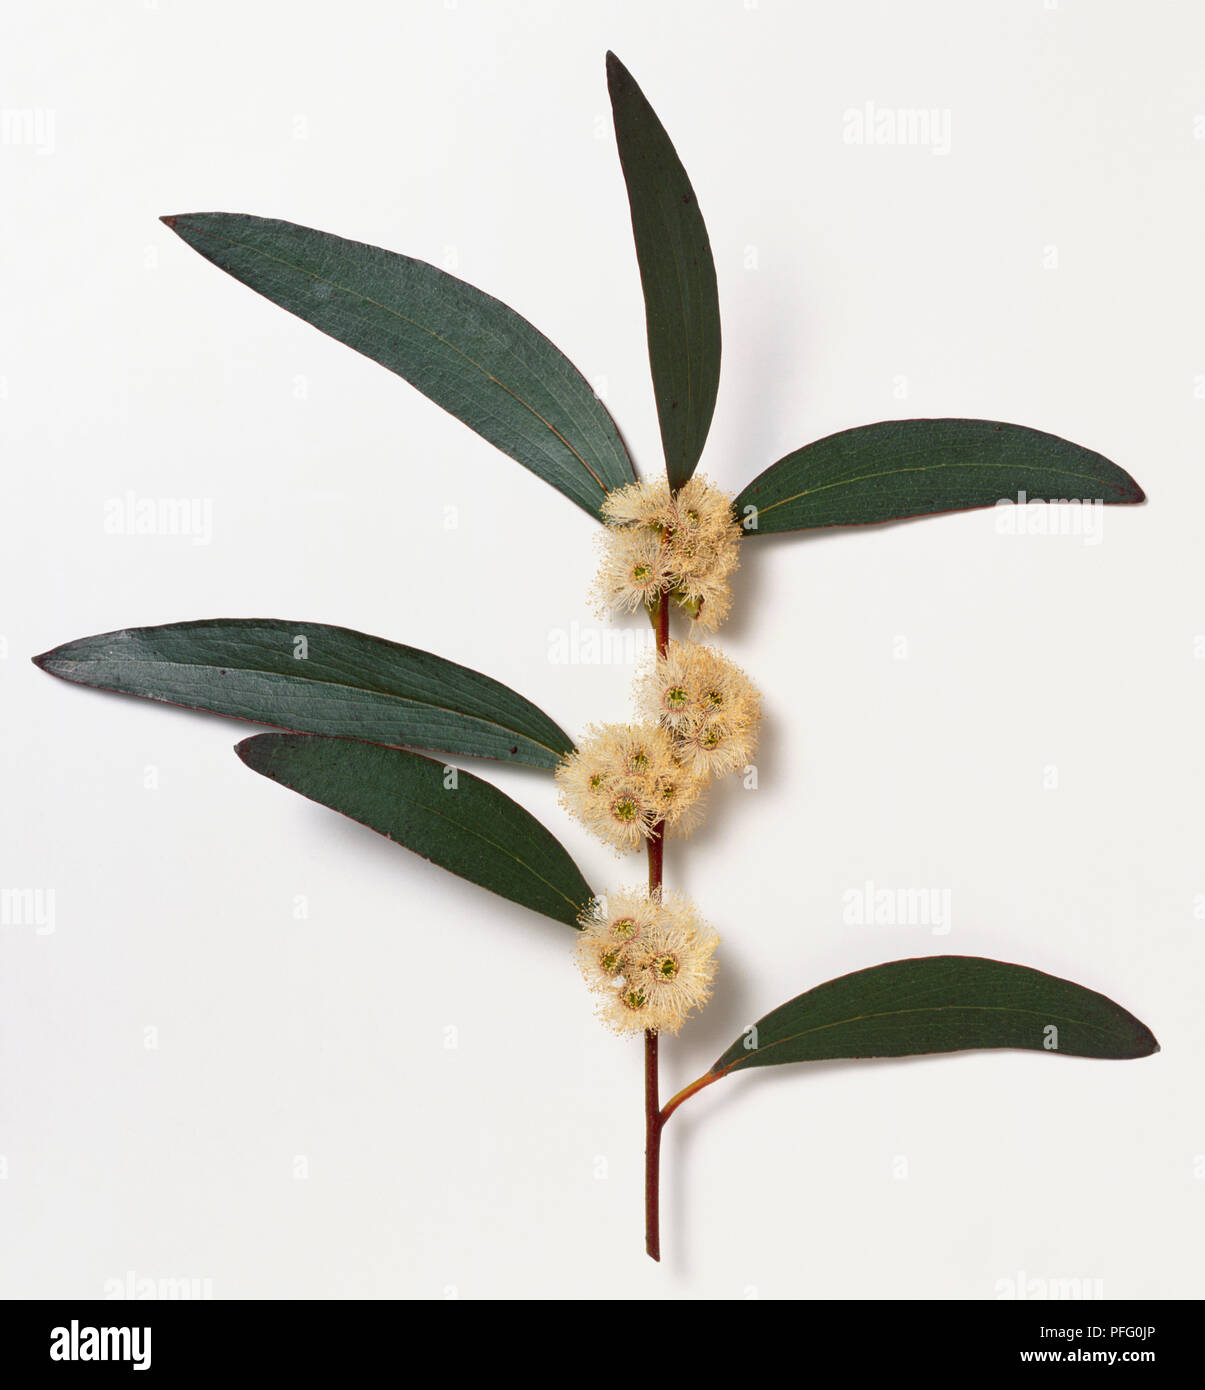 Myrtaceae, Eucalyptus pauciflora, Snow Gum, stem with leaves on red shoots, and white flower borne in clusters at leaf axils. Stock Photo